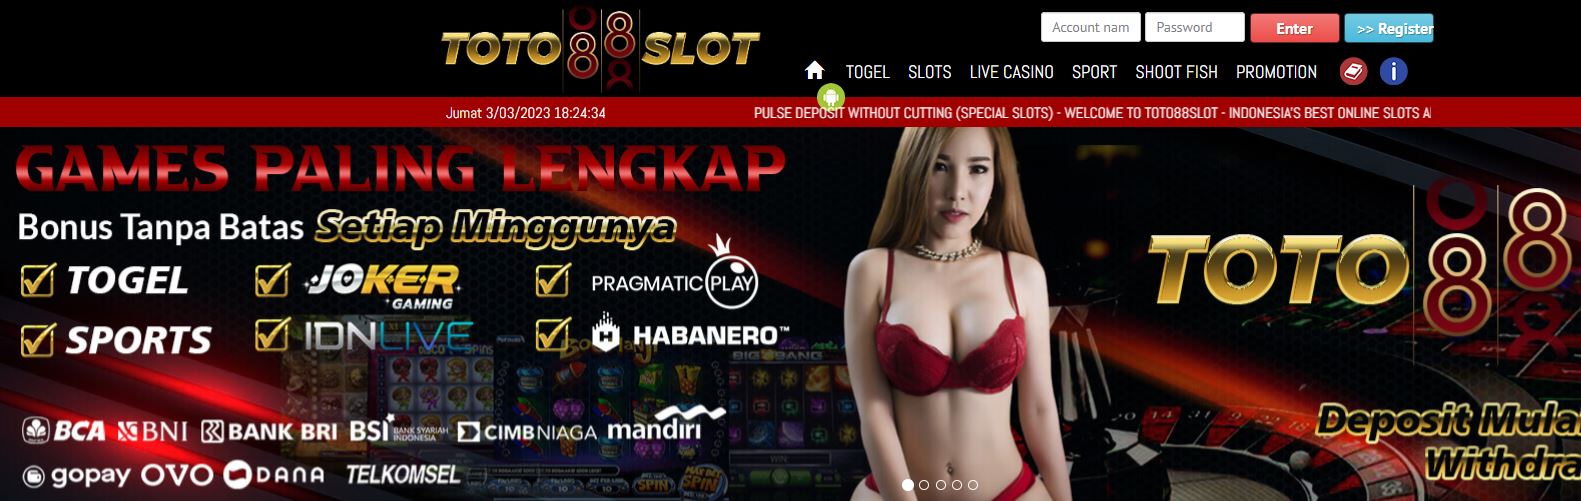 Toto88 Online Indonesian Casino Review